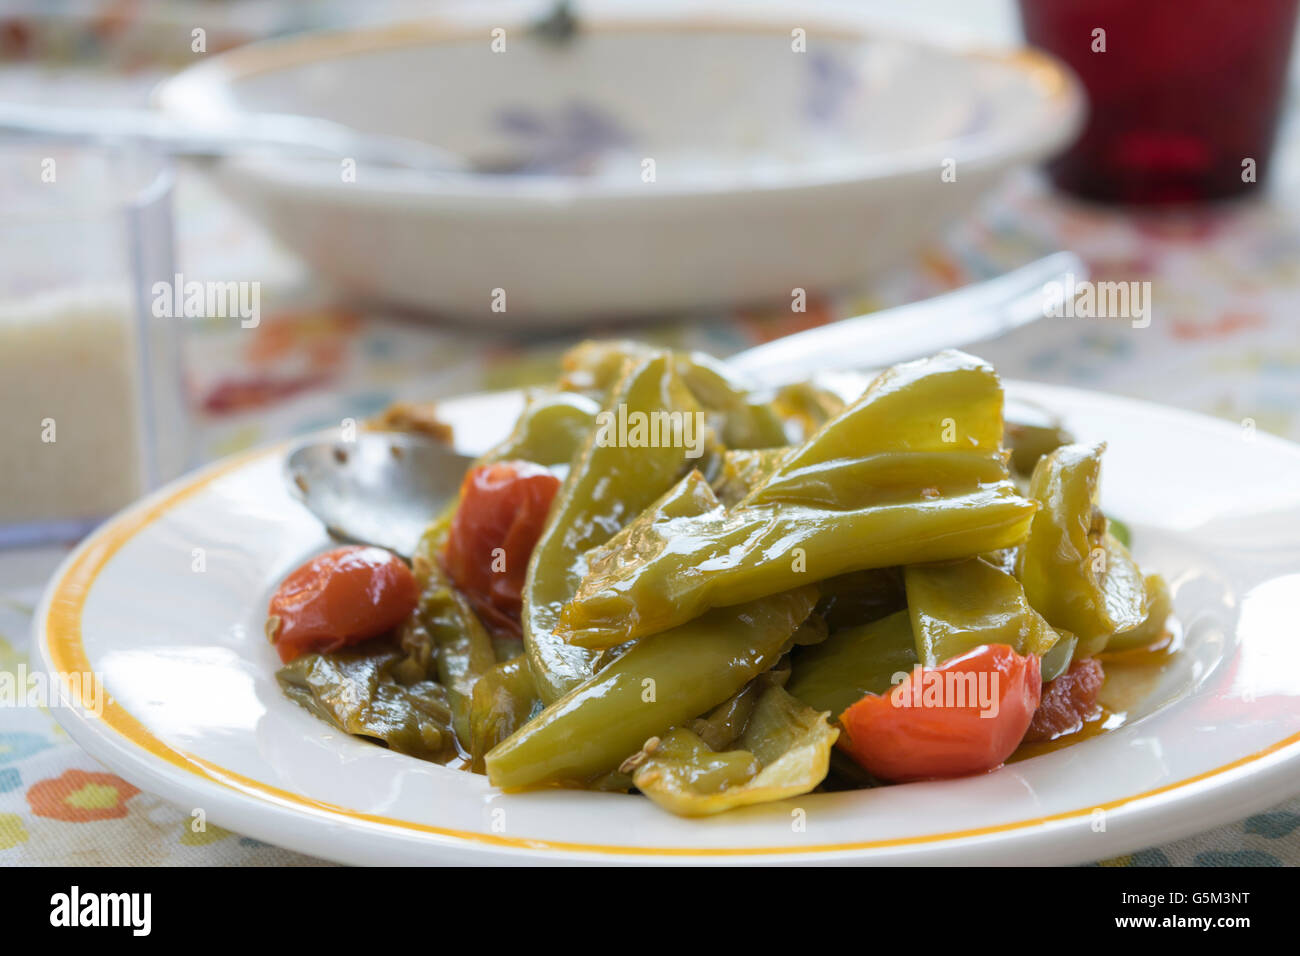 peperonata or fried peppers italian style with friarelli and cherry tomatoes Stock Photo